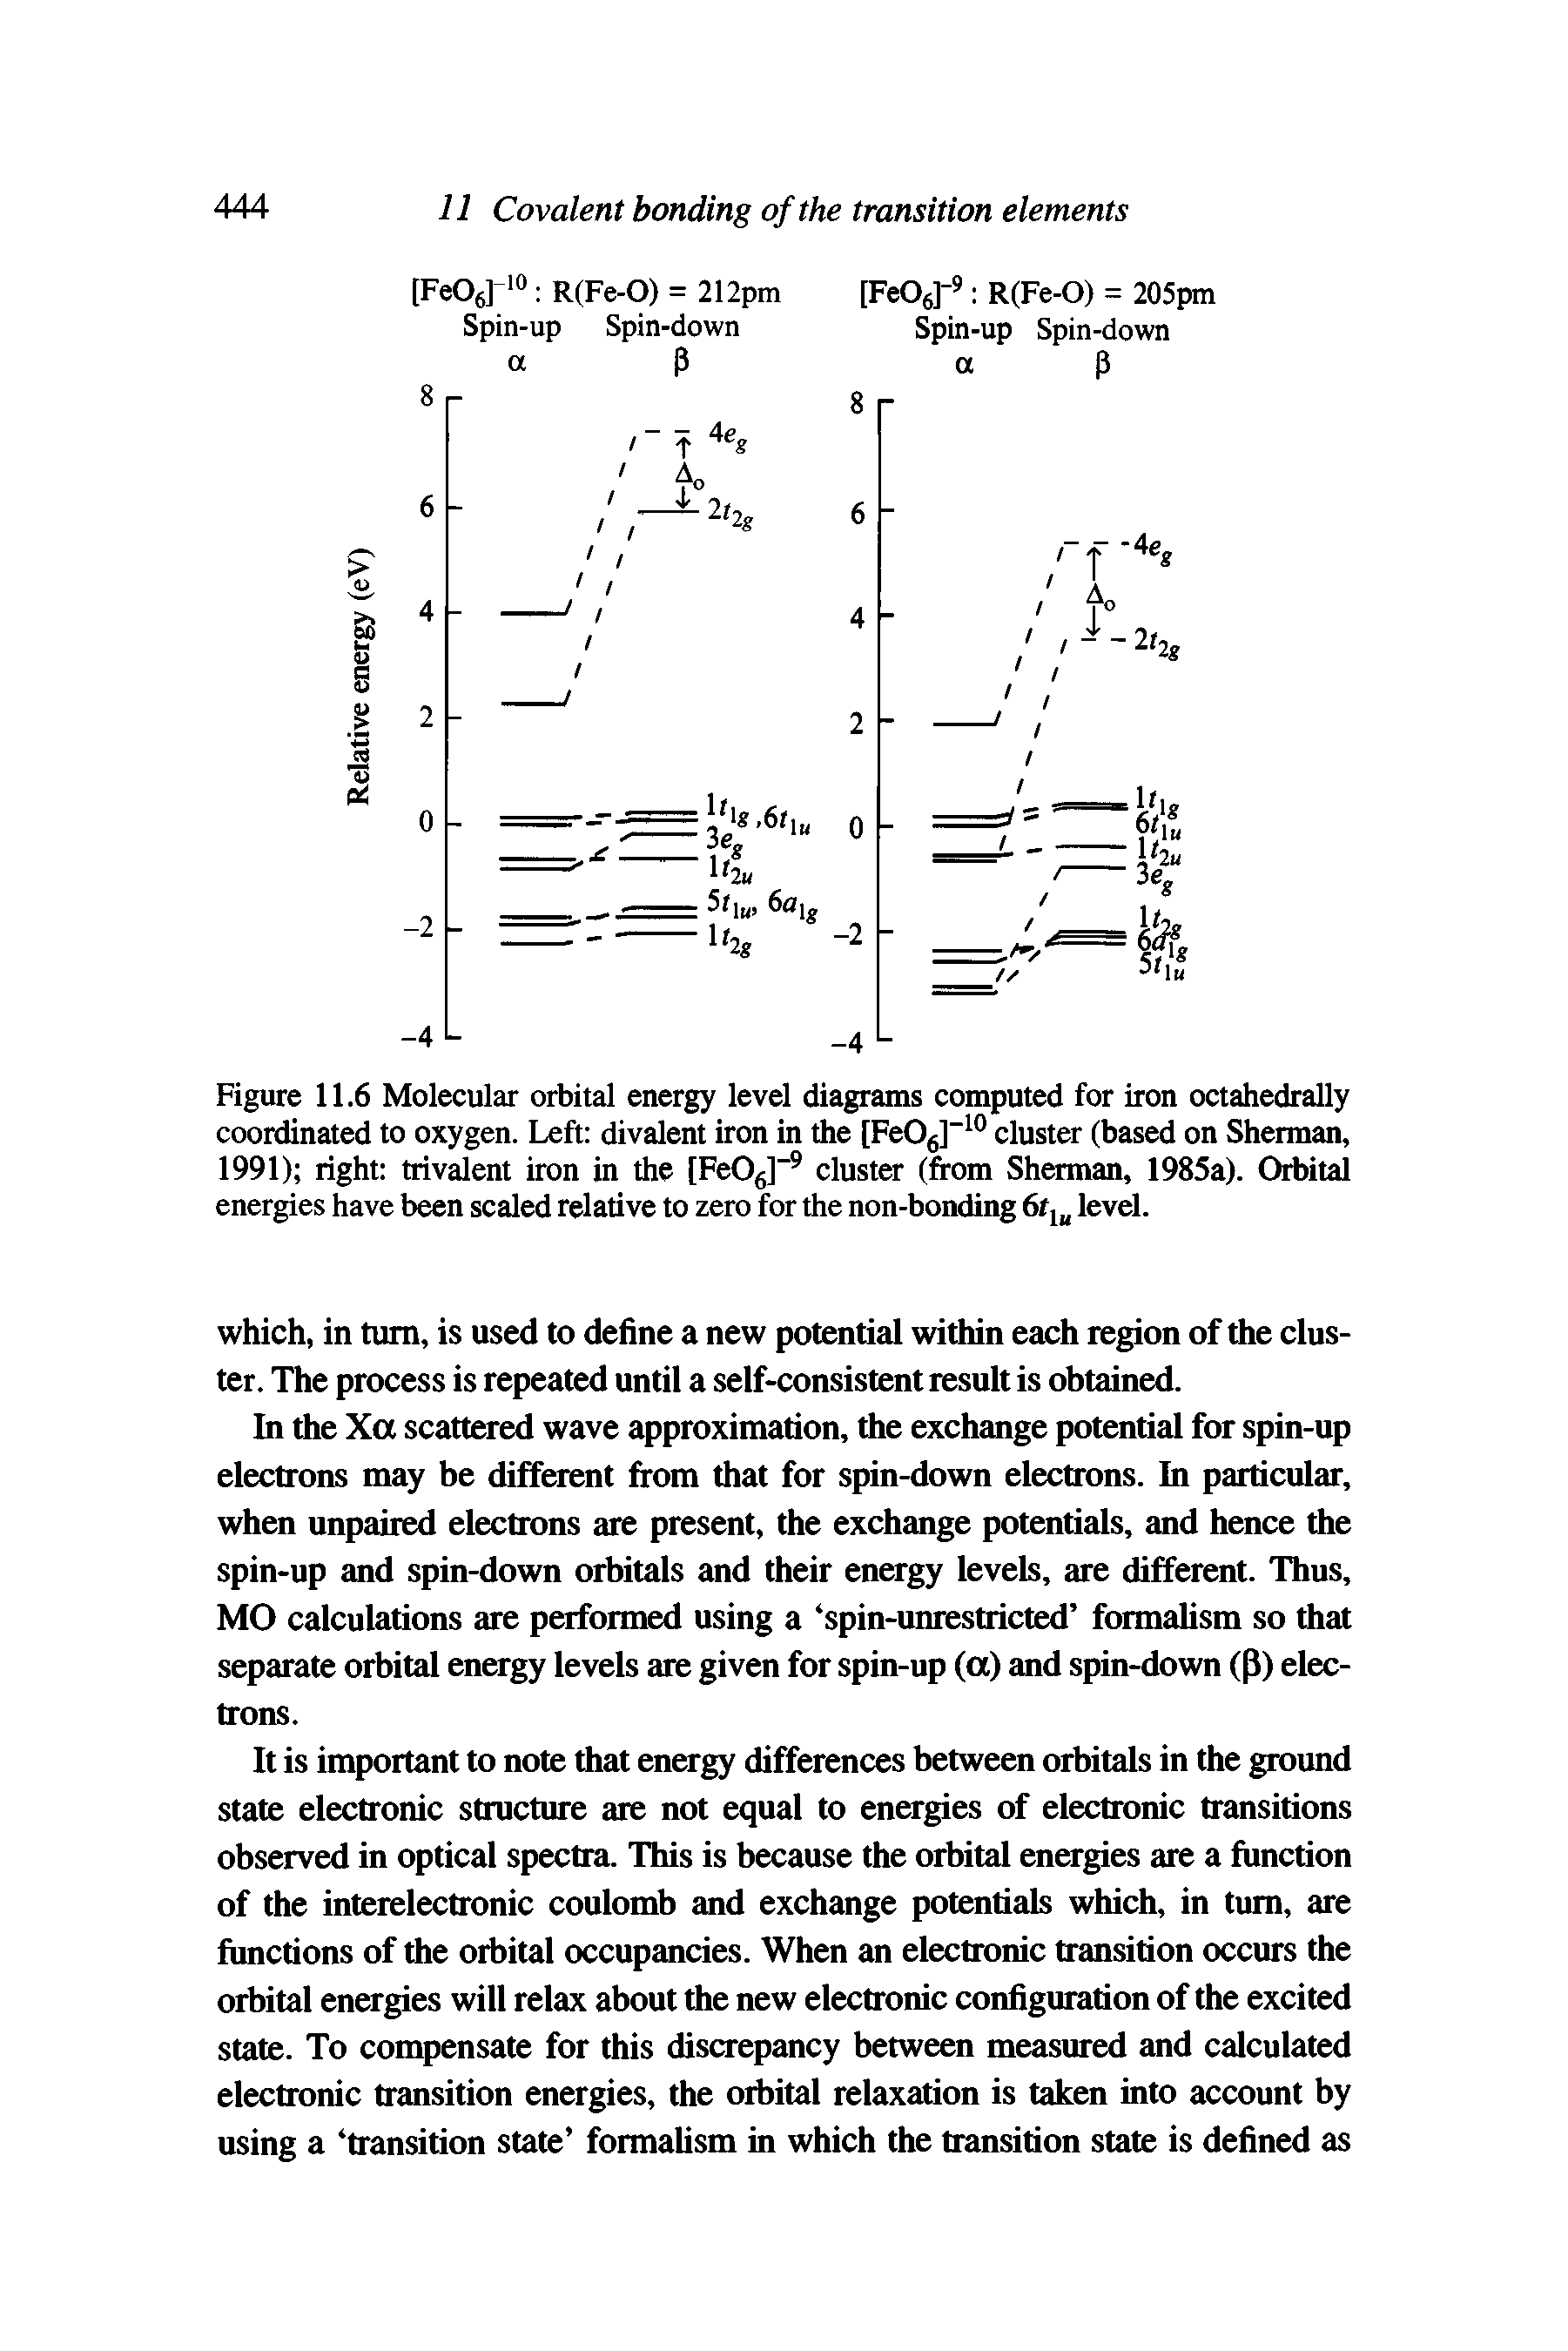 Figure 11.6 Molecular orbital energy level diagrams computed for iron octahedrally coordinated to oxygen. Left divalent iron in the [Fe06]-1° cluster (based on Sherman, 1991) right trivalent iron in the [Fe06]-9 cluster (from Sherman, 1985a). Orbital energies have been scaled relative to zero for the non-bonding 6rlu level.